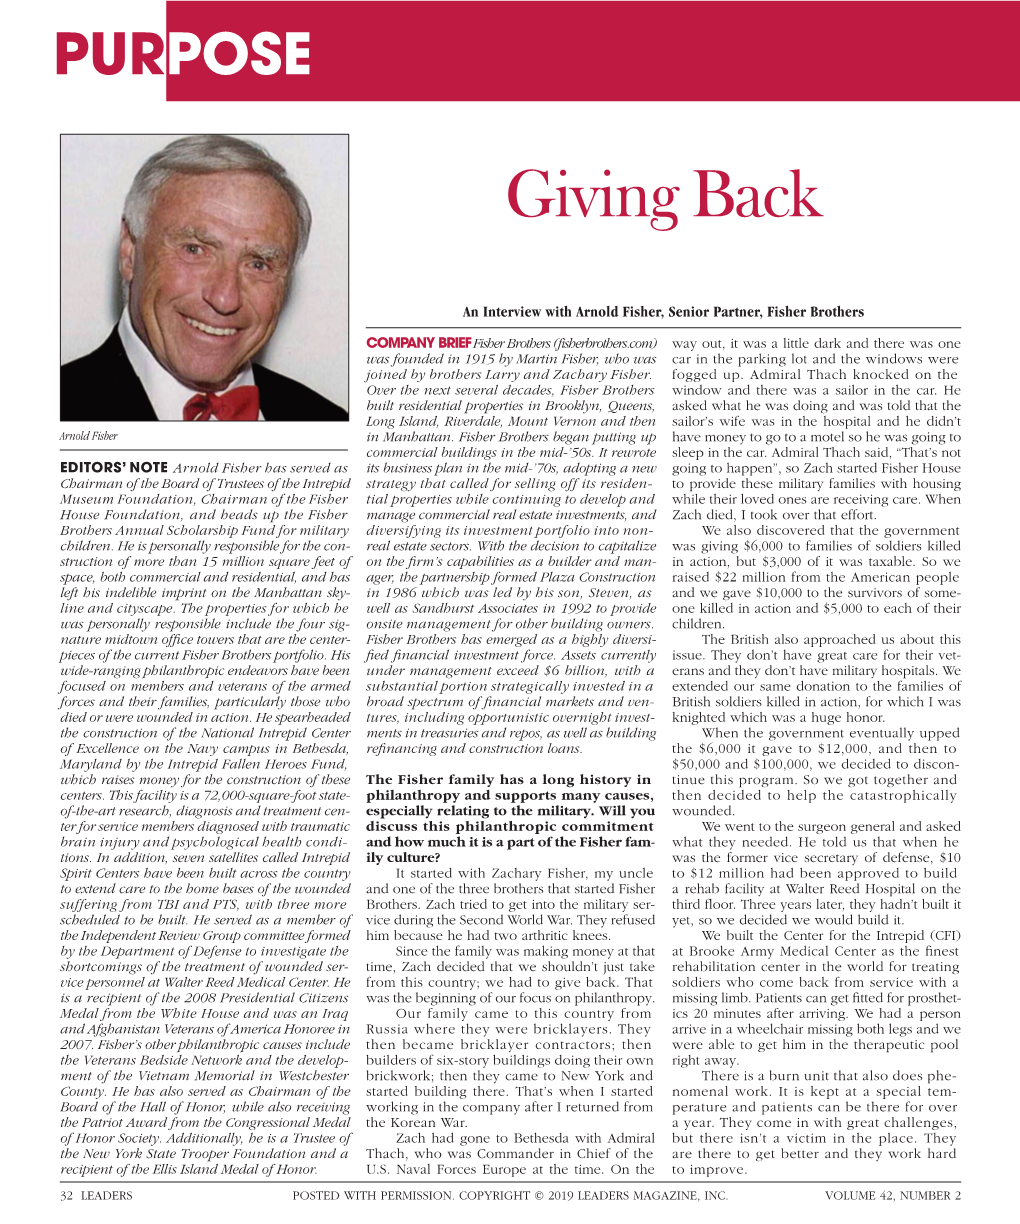 To Download a PDF of an Interview with Arnold Fisher, Senior Partner, Fisher Brothers